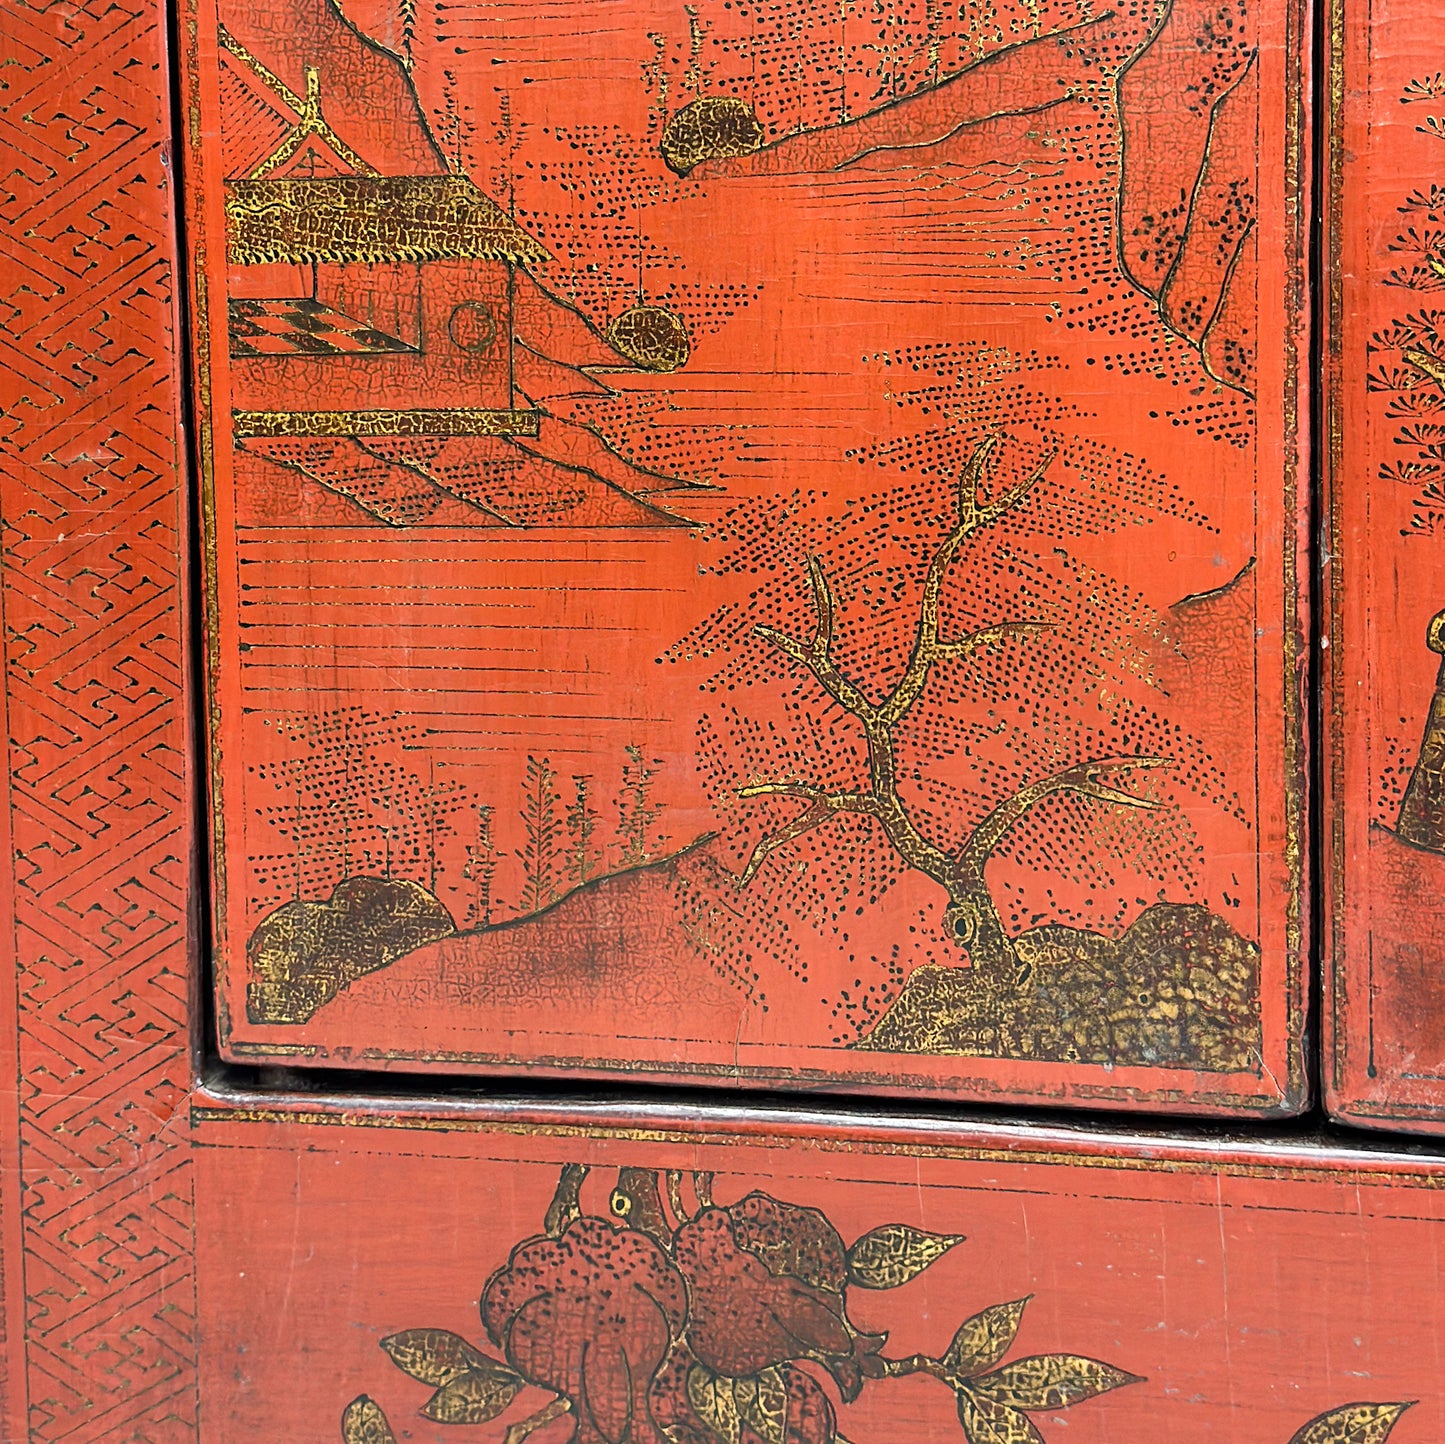 Antique Shanxi Hand-painted Wedding Cabinet